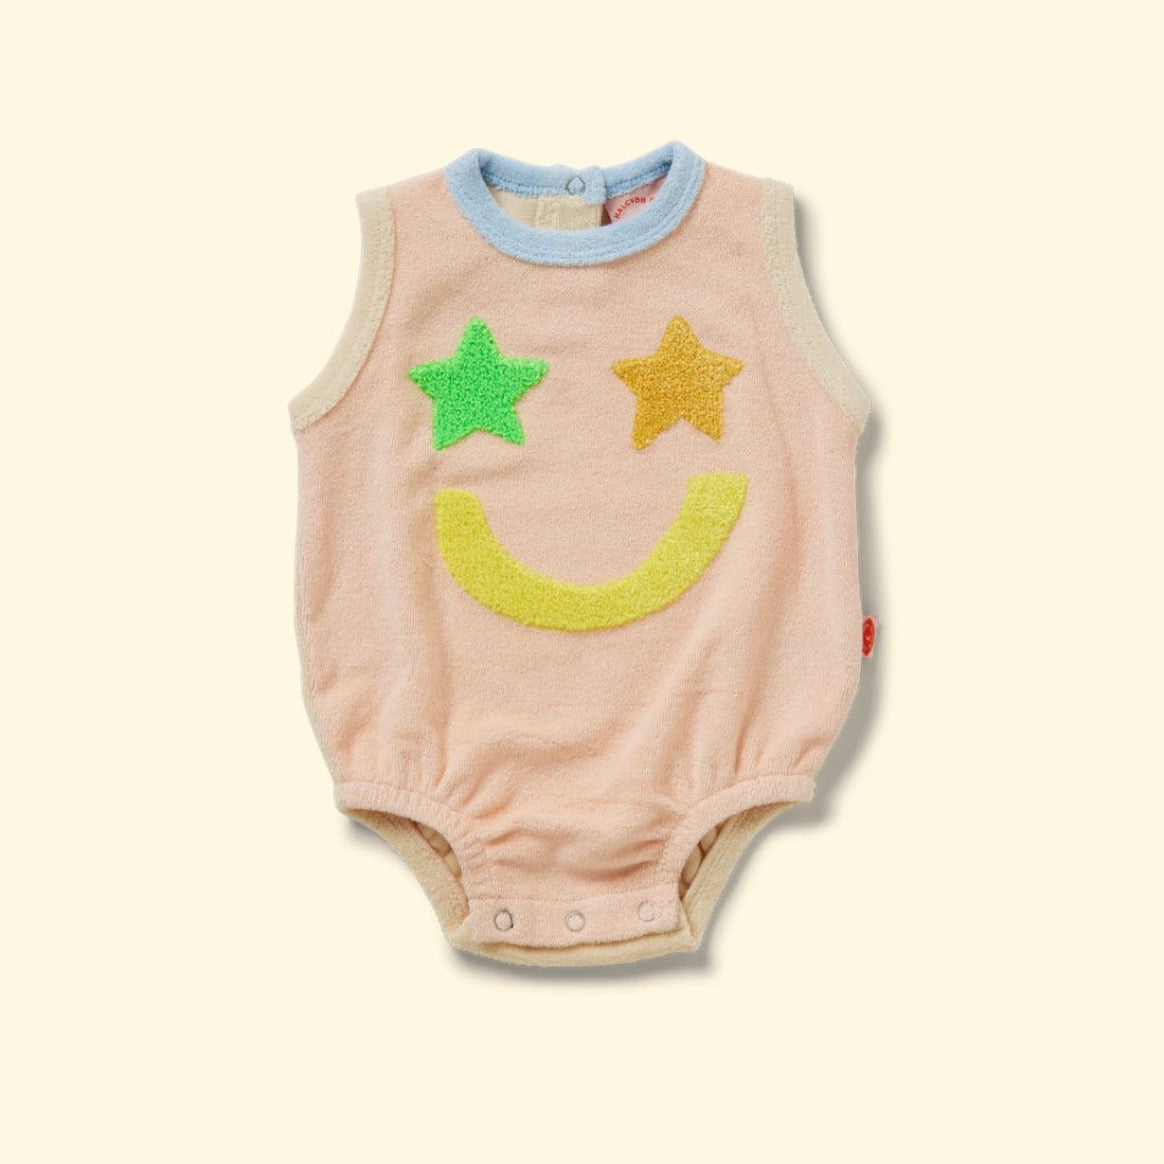 Starry Eyed Terry Singlet Suit by Halcyon Nights